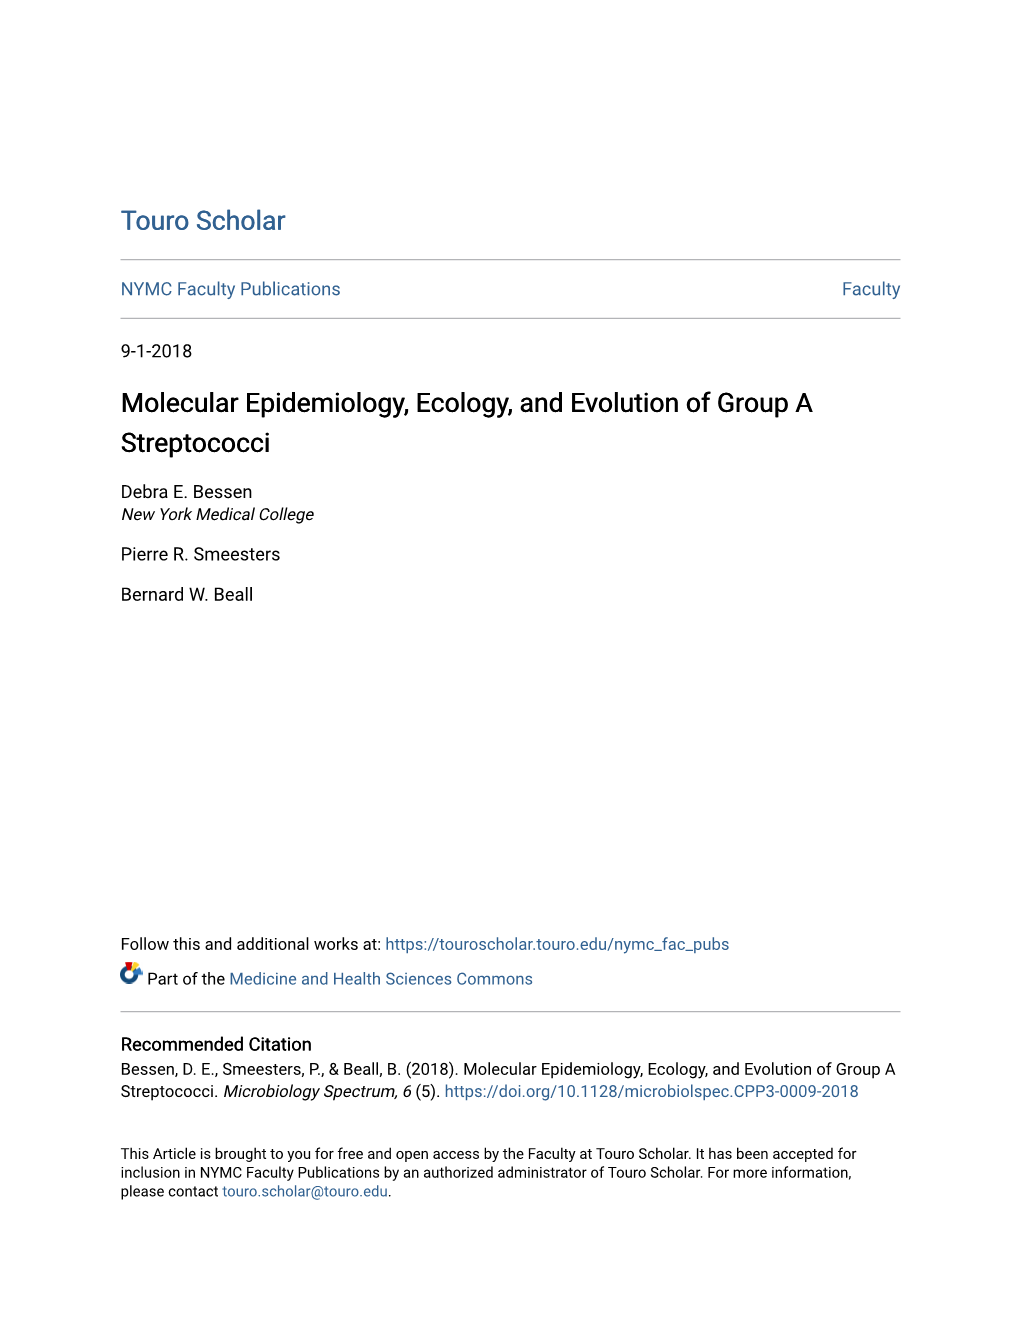 Molecular Epidemiology, Ecology, and Evolution of Group a Streptococci